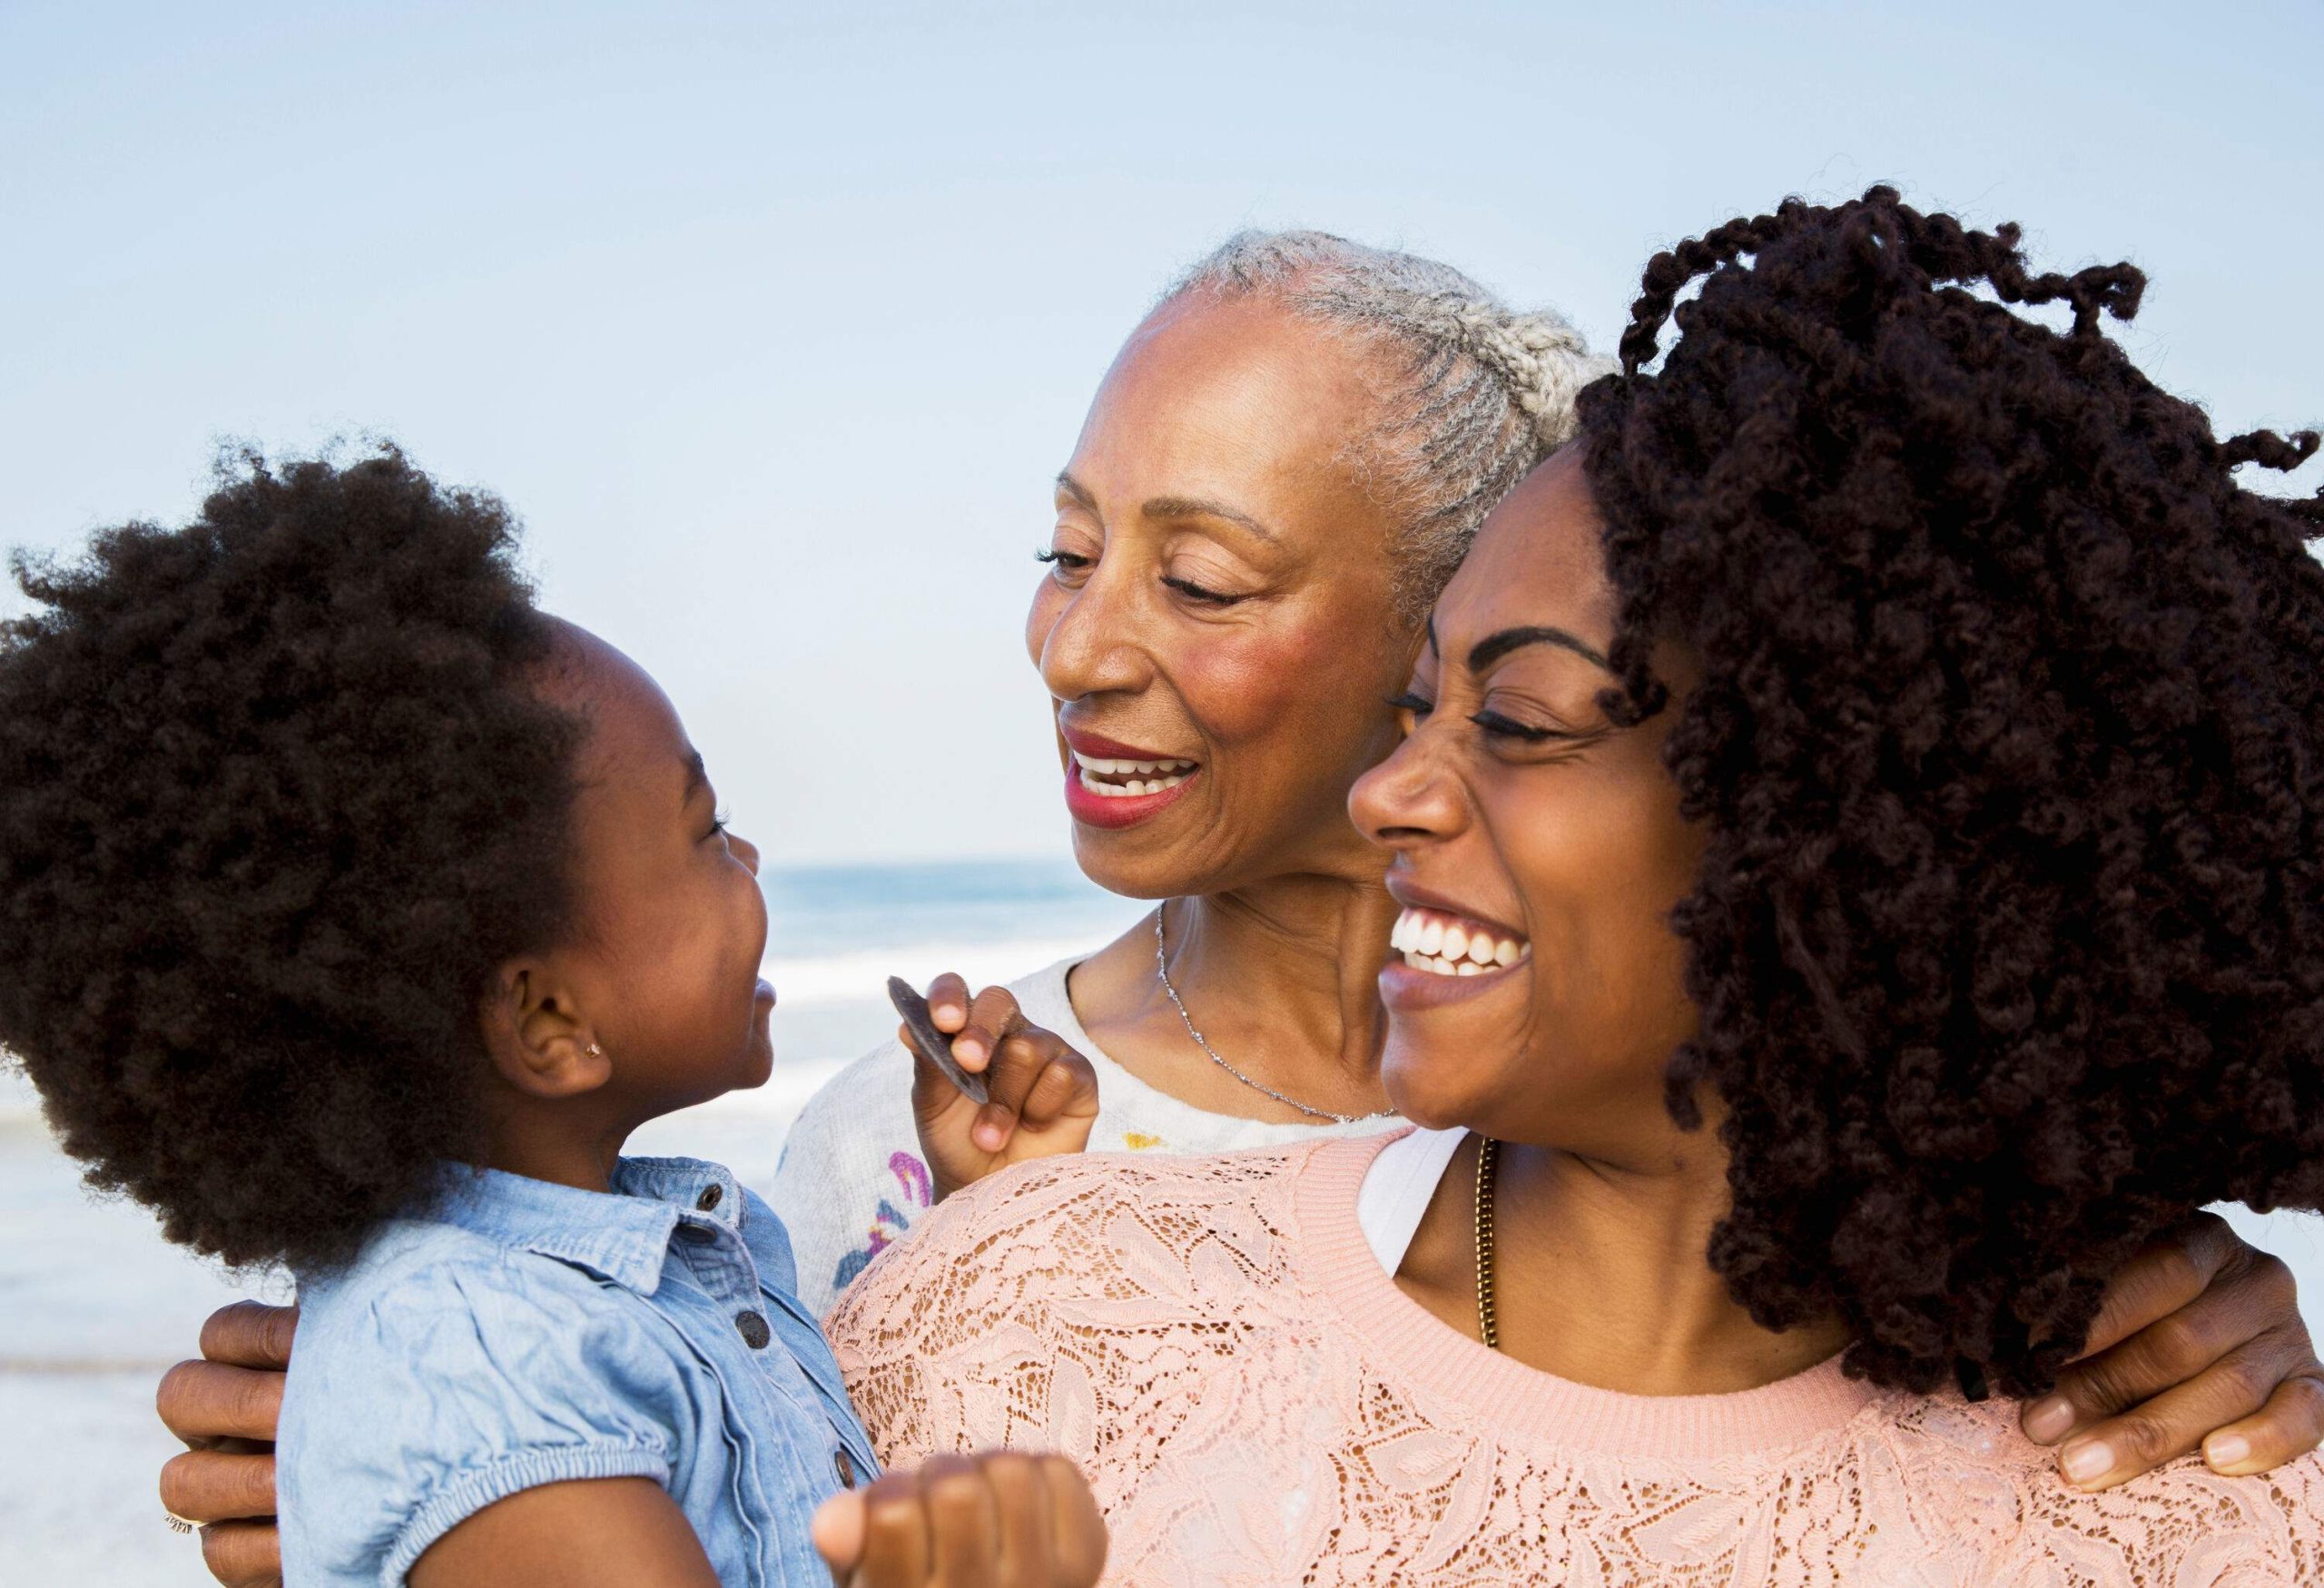 A joyful three-generational family with Afro-styled hair shares smiles and loving glances, cherishing their time together.